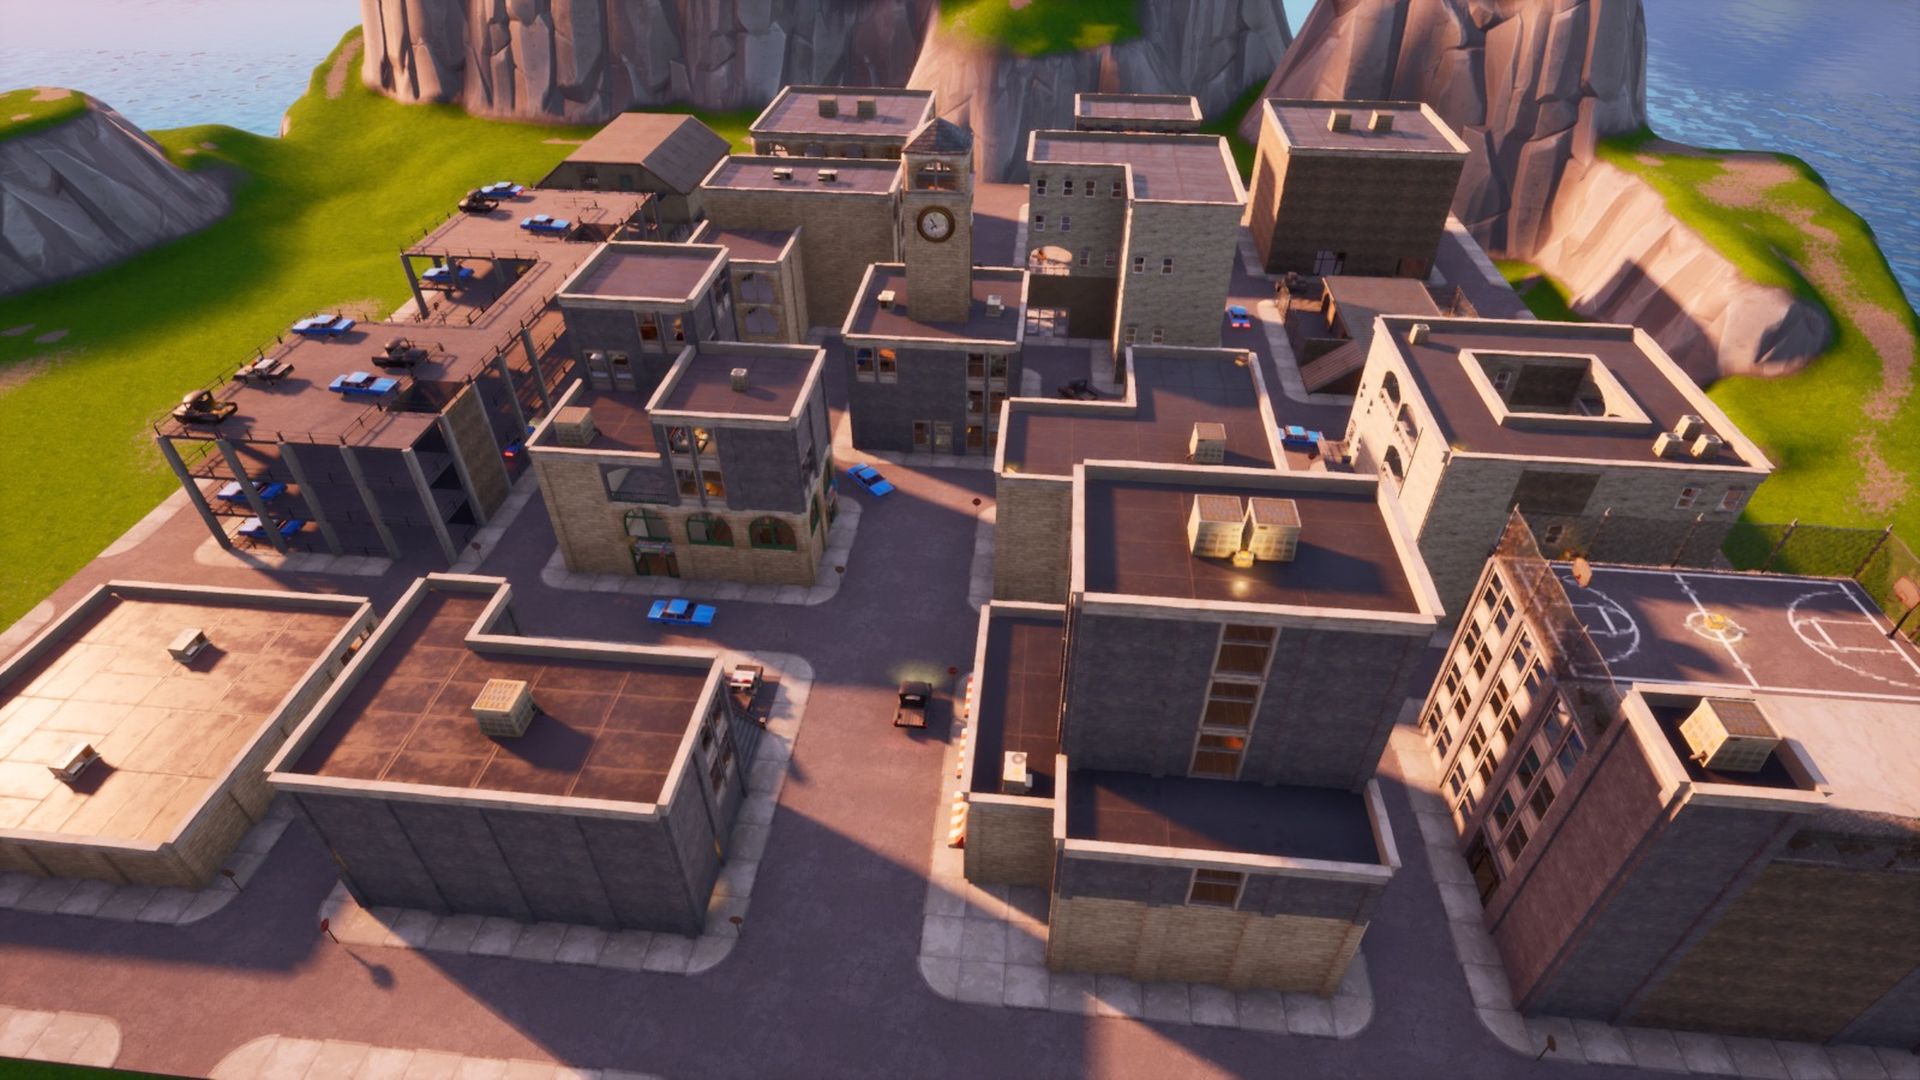 Today we are going to review everything related to the return of the Fortnite Block 2. The Block is scheduled to return in version 2.0 of the game, which will include new features, props, and more. Players will have the ability to assist in the re-building of Tilted Towers this time around.